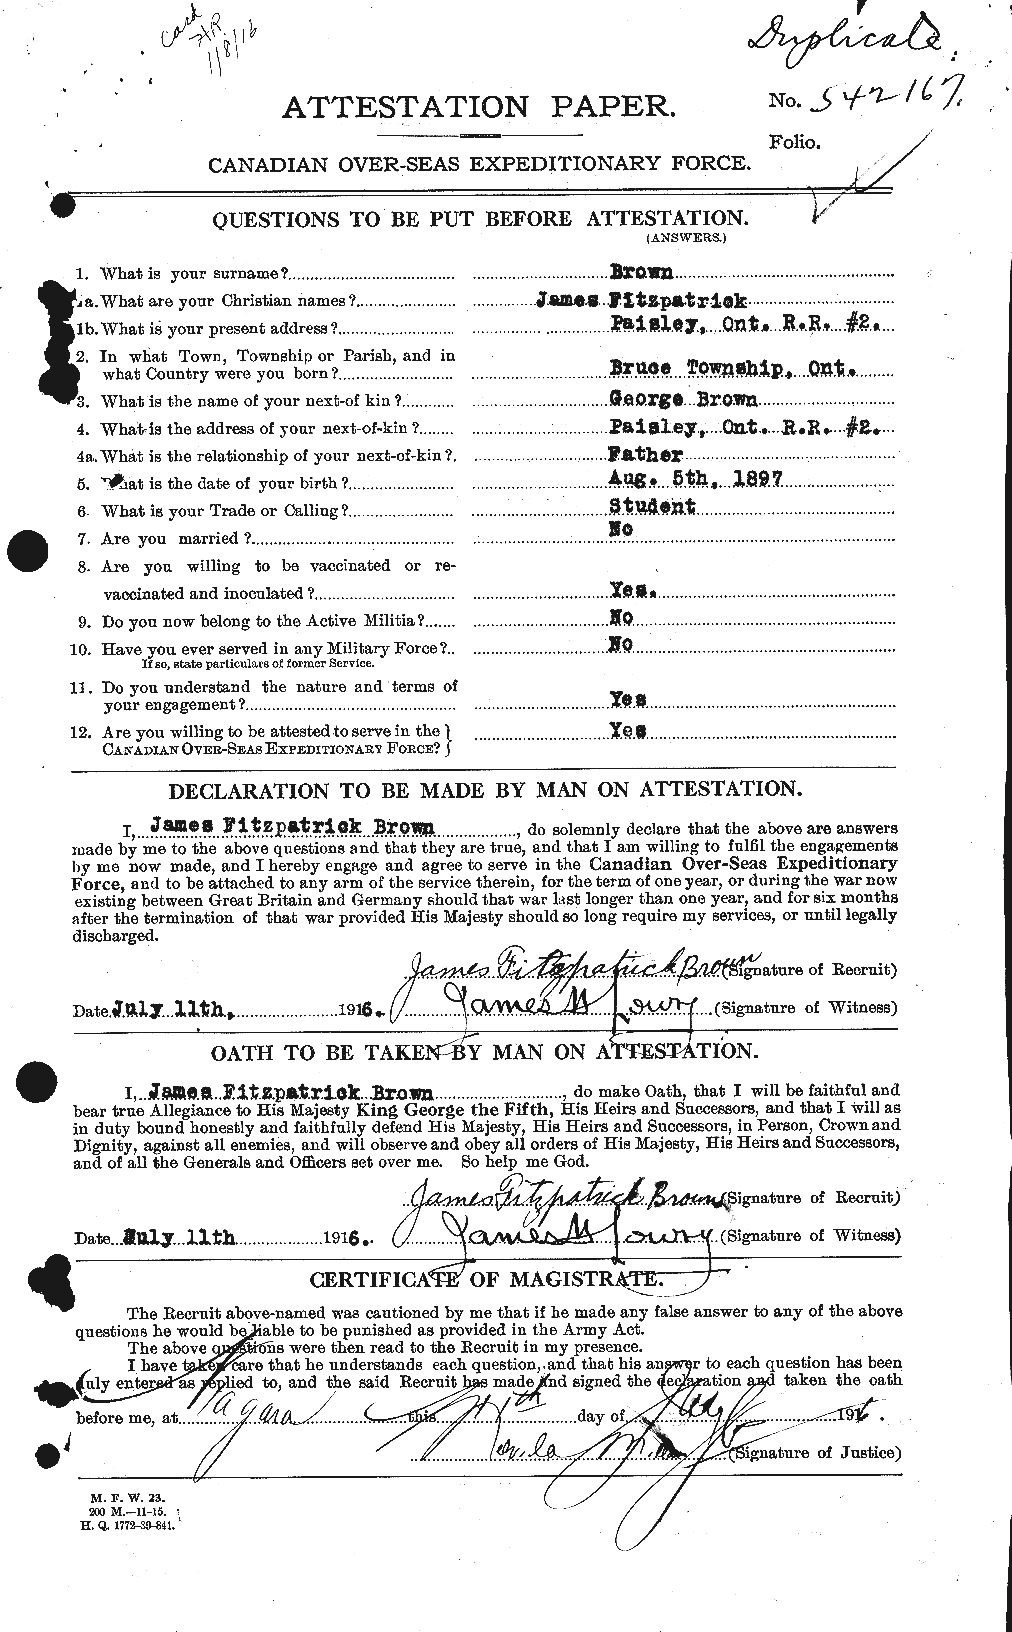 Personnel Records of the First World War - CEF 269526a